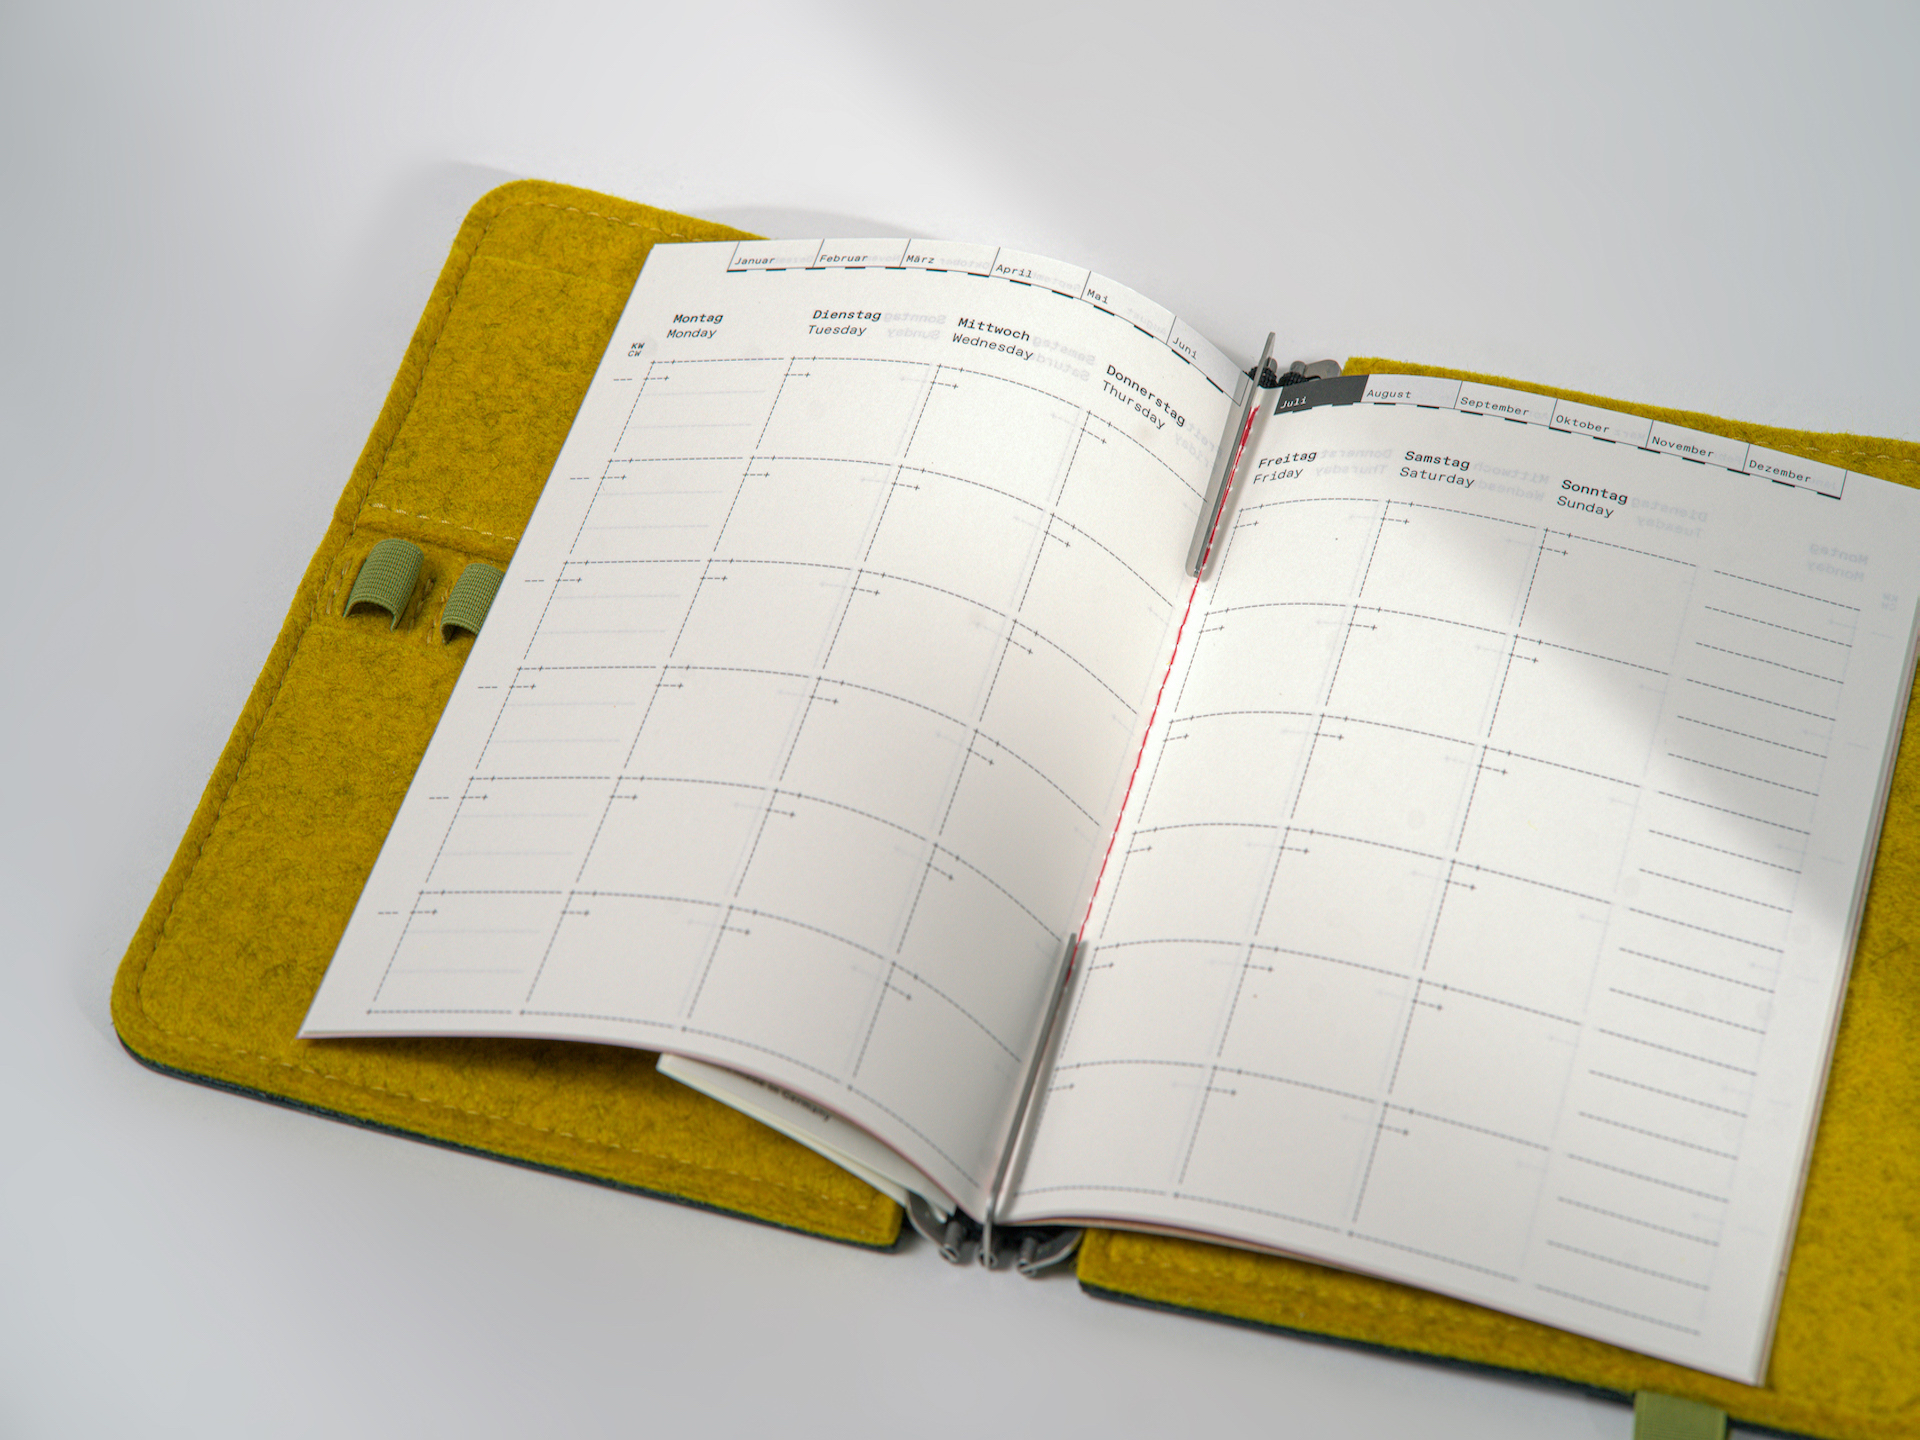 Undated monthly planner in M size (14 × 20 cm) for A5, sewn with red thread, featuring a sturdy cover made from recycled cardboard. 32 pages with colored endpapers.